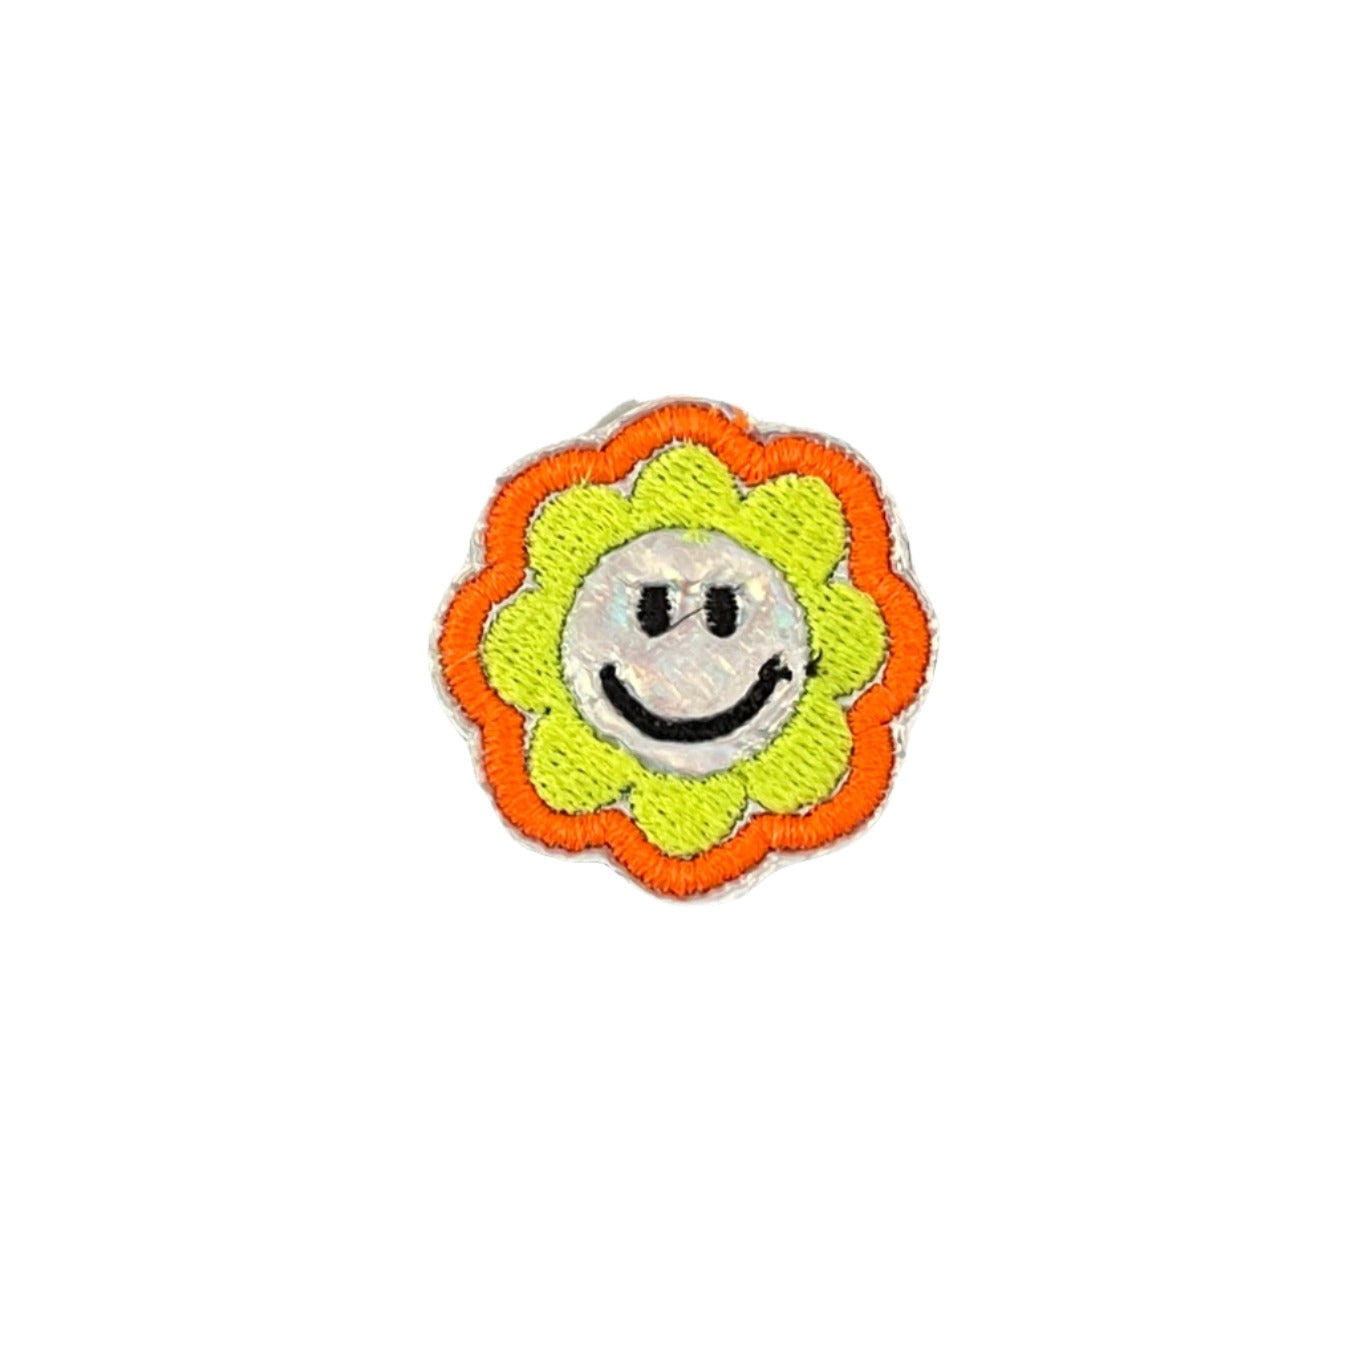 Bright Smiley Flower Patch for Custom Hats, Apparel, and Accessories